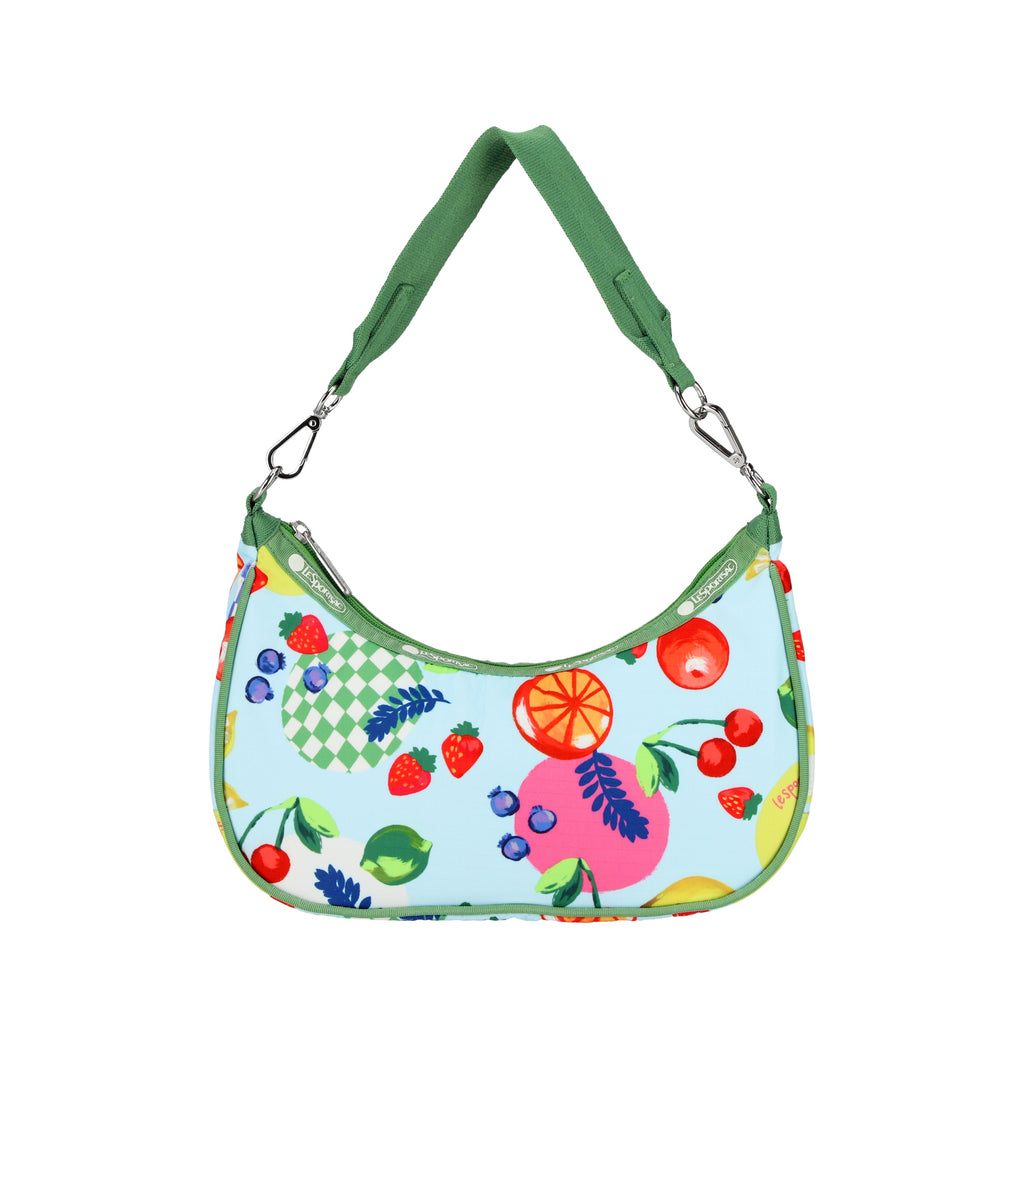 Lesportsac Small Convertible Hobo with Stones